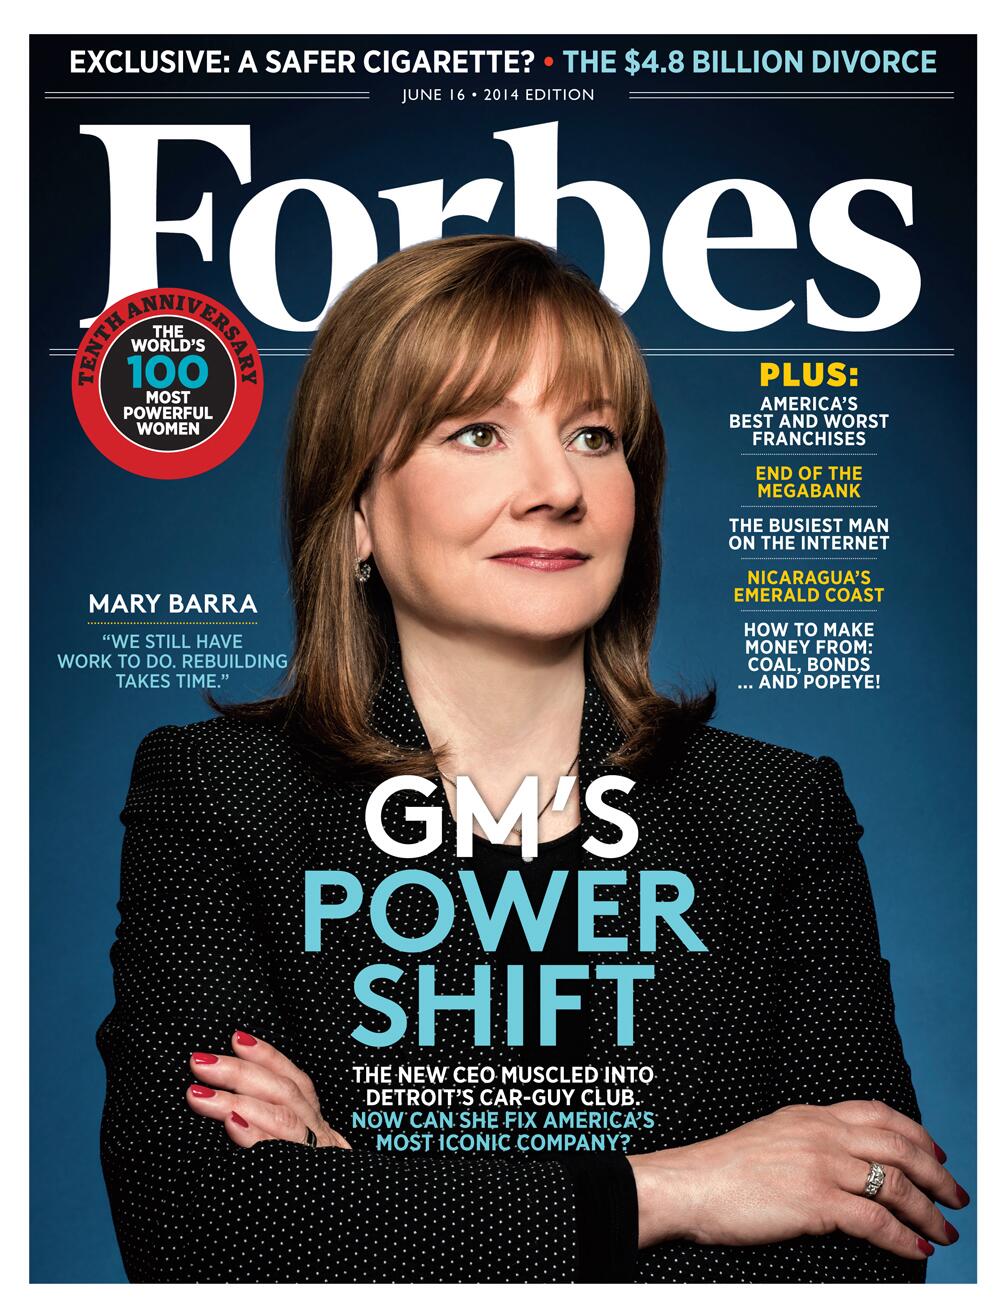 Forbes on Twitter: "Exclusive: Inside Mary Barra's urgent mission to fix  GM: http://t.co/6GM6P7dEyK #PowerWomen http://t.co/rl8PzycMwr" / Twitter